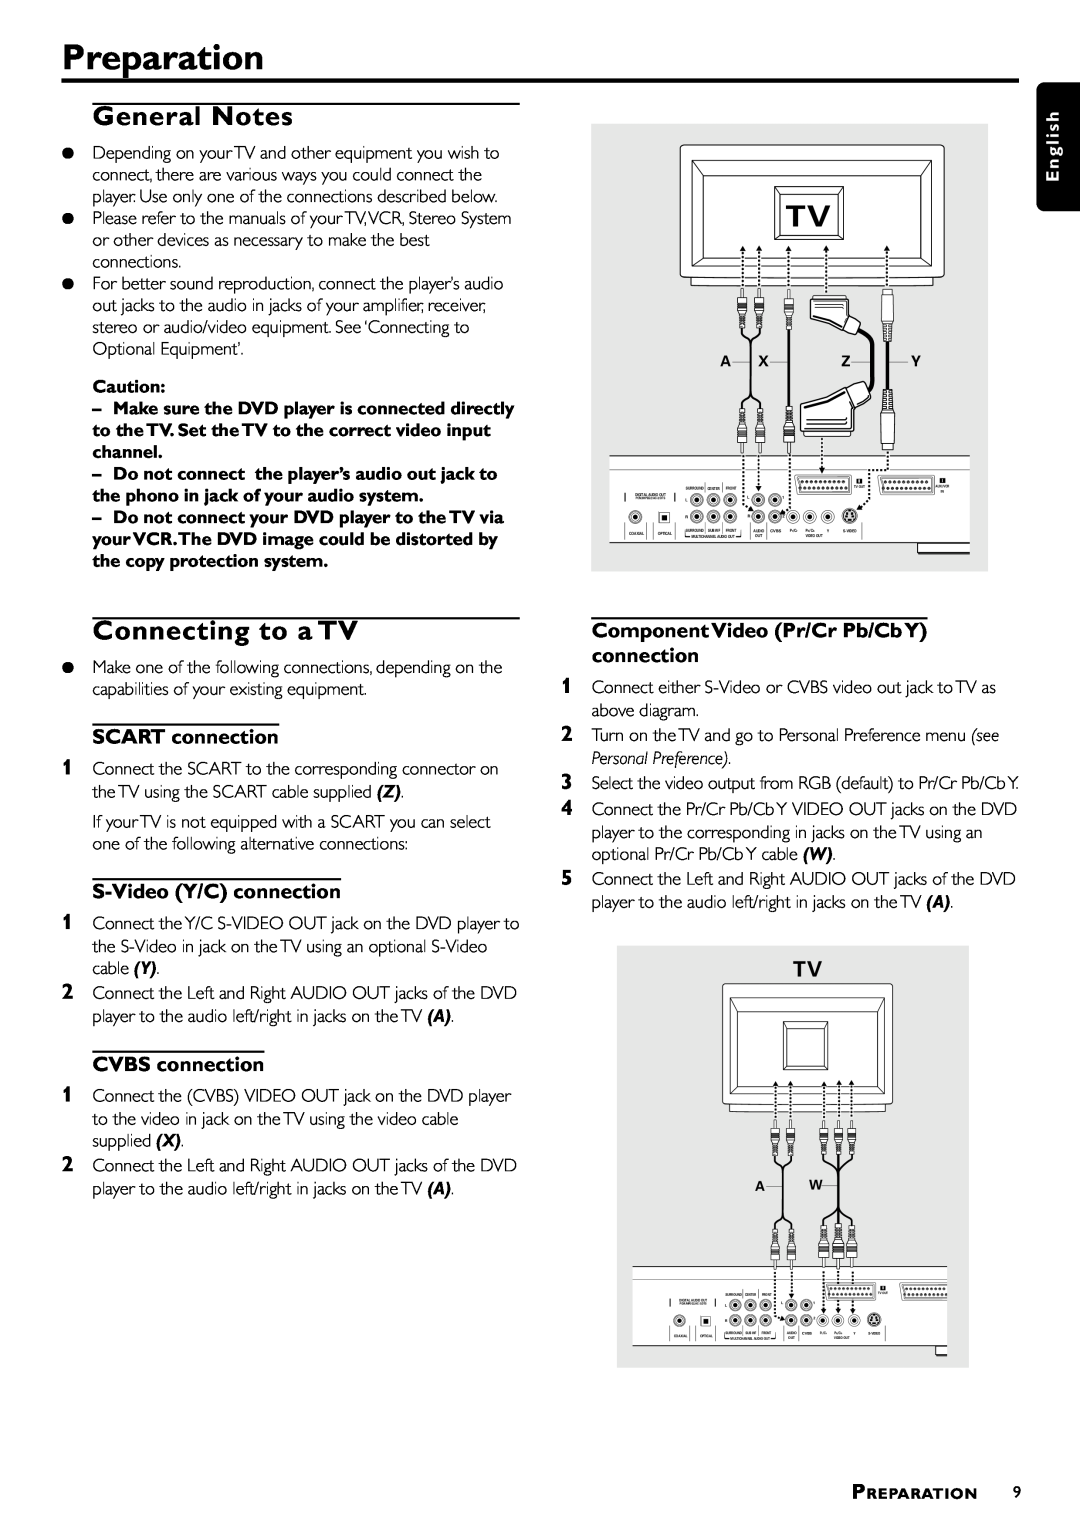 Philips DVD952/021 Preparation, General Notes, Connecting to a TV, SCART connection, S-Video Y/C connection, E n g l i s h 